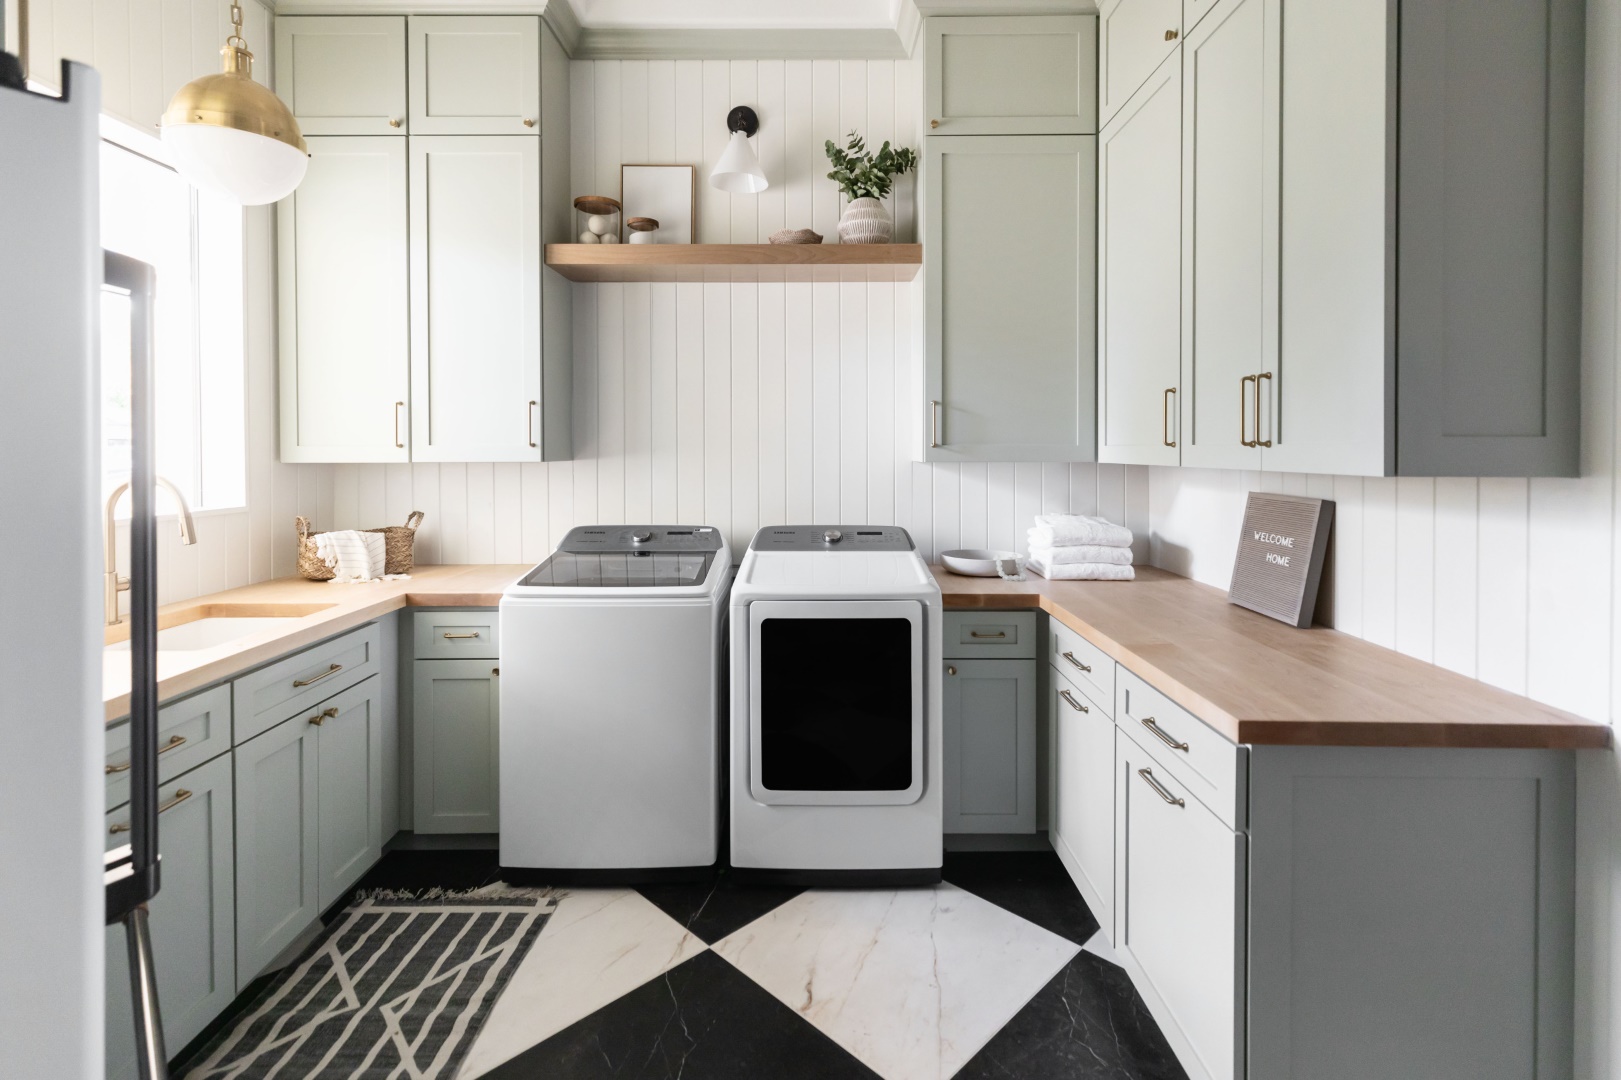 16 Transitional Laundry Rooms That Will Make You Enjoy Doing Laundry